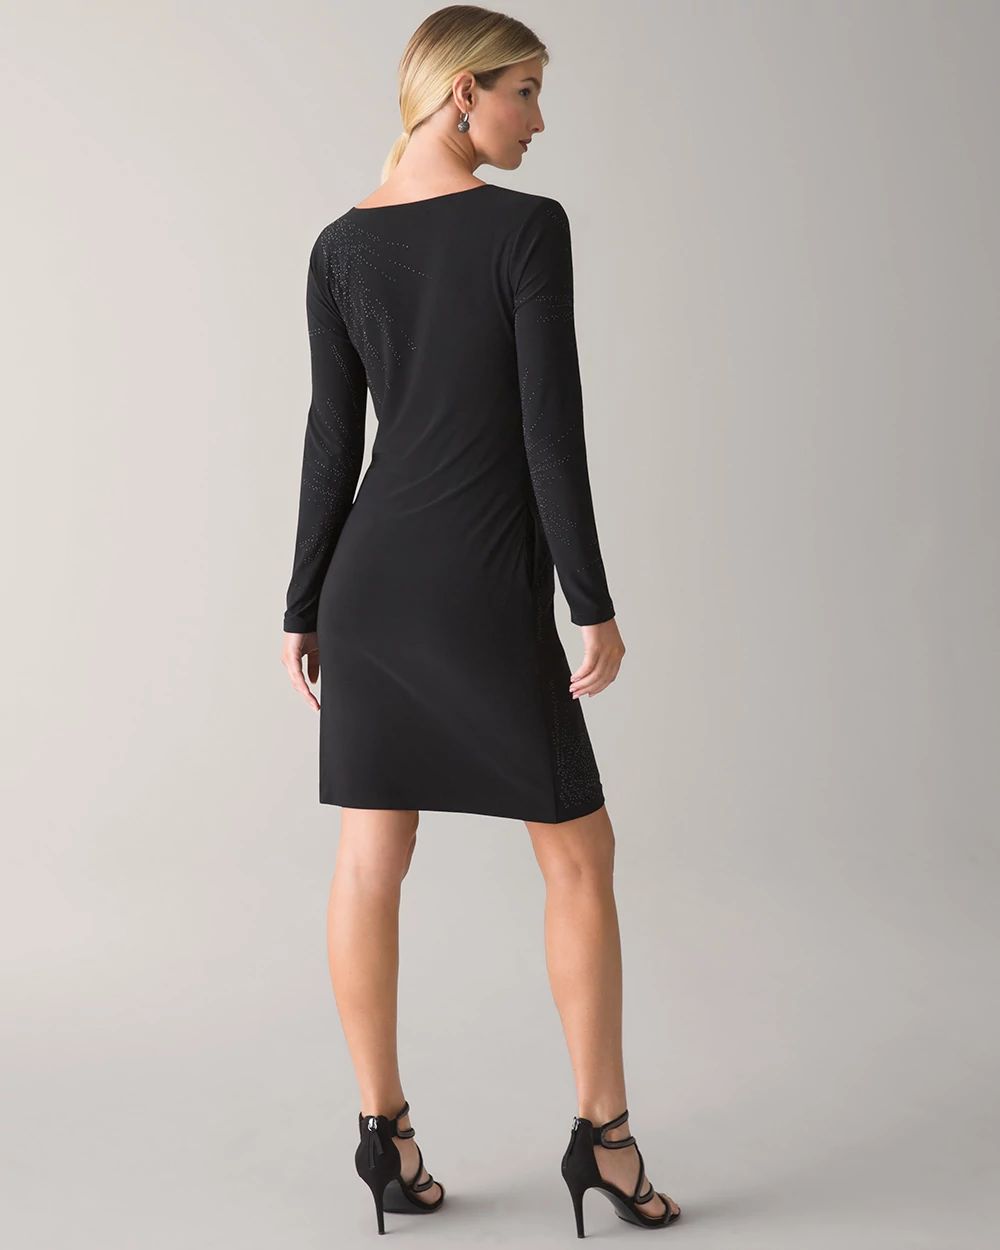 Petite Matte Jersey Pleated Shoulder Dress click to view larger image.